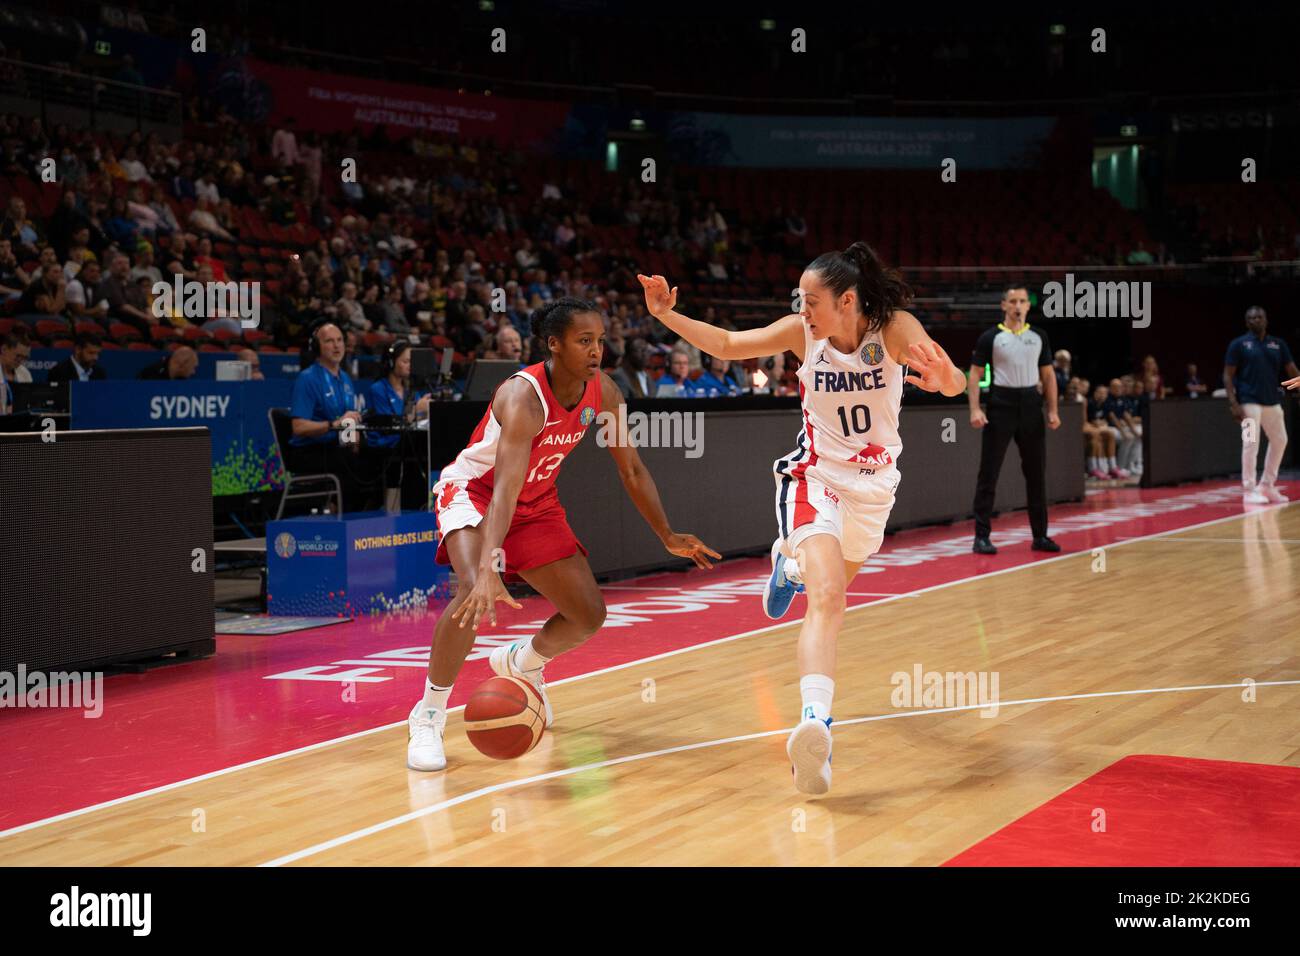 Sydney, Australia. 23rd Sep, 2022. Shay Colley (13 Canada) drives to the basket defended by Sarah Michel (10 France) during the FIBA Womens World Cup 2022 game between France and Canada at the Sydney Superdome in Sydney, Australia. (Foto: Noe Llamas/Sports Press Photo/C - ONE HOUR DEADLINE - ONLY ACTIVATE FTP IF IMAGES LESS THAN ONE HOUR OLD - Alamy) Credit: SPP Sport Press Photo. /Alamy Live News Stock Photo